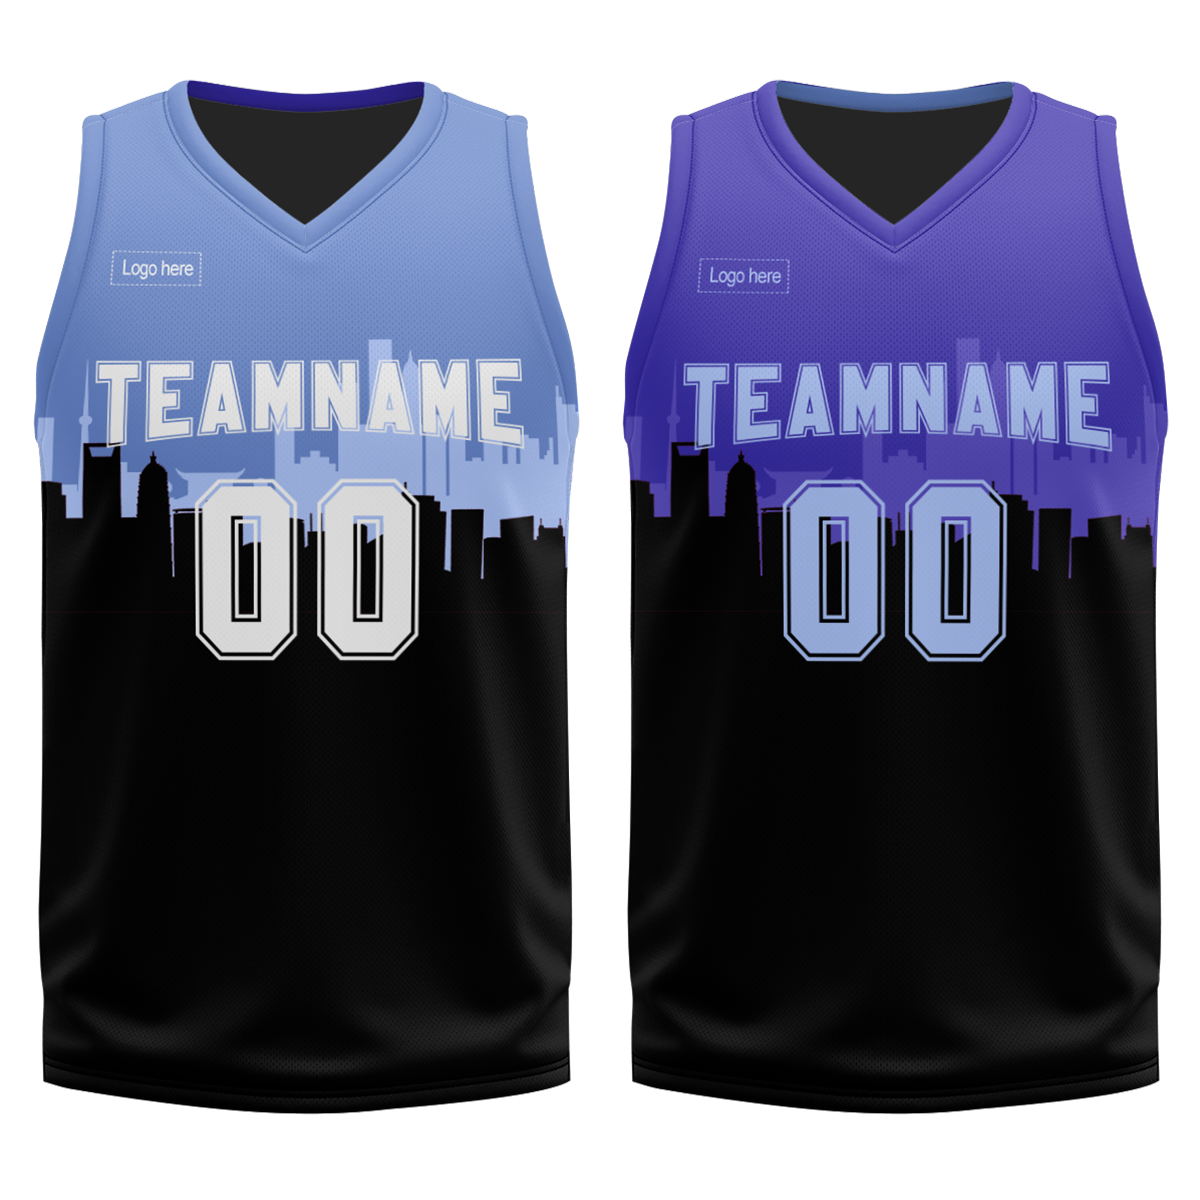 new-design-sublimation-basketball-jersey-uniform-for-teenager-and-adult-with-custom-logo-at-cj-pod-4